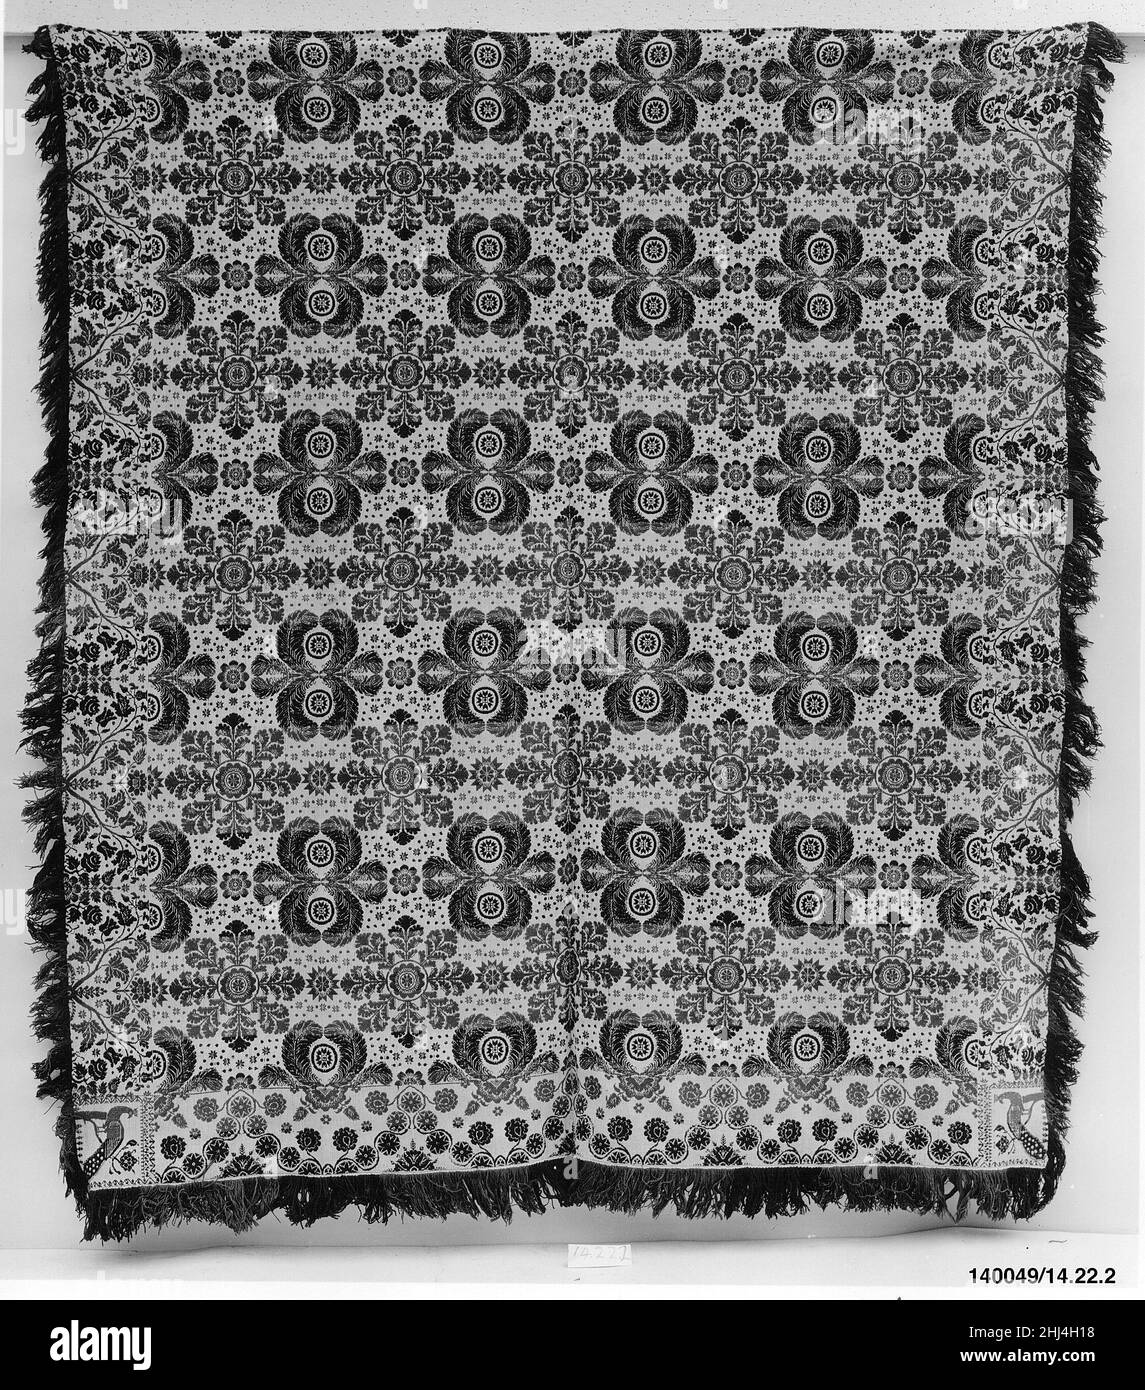 Coverlet ca. 1840 American This coverlet is woven in two panels and seamed at the center. It has a warp of undyed and light blue cotton and a weft of dark blue, green, and red wool and undyed cotton. The central field shows feather medallions alternating with foliate medallions. The bottom border has a stylized vine motif, and the right and left borders have roses and tulips. Peacocks adorn each of the two corner blocks. Both sides of the coverlet have natural fringe, and there is attached fringe along the bottom edge.. Coverlet  13637 Stock Photo